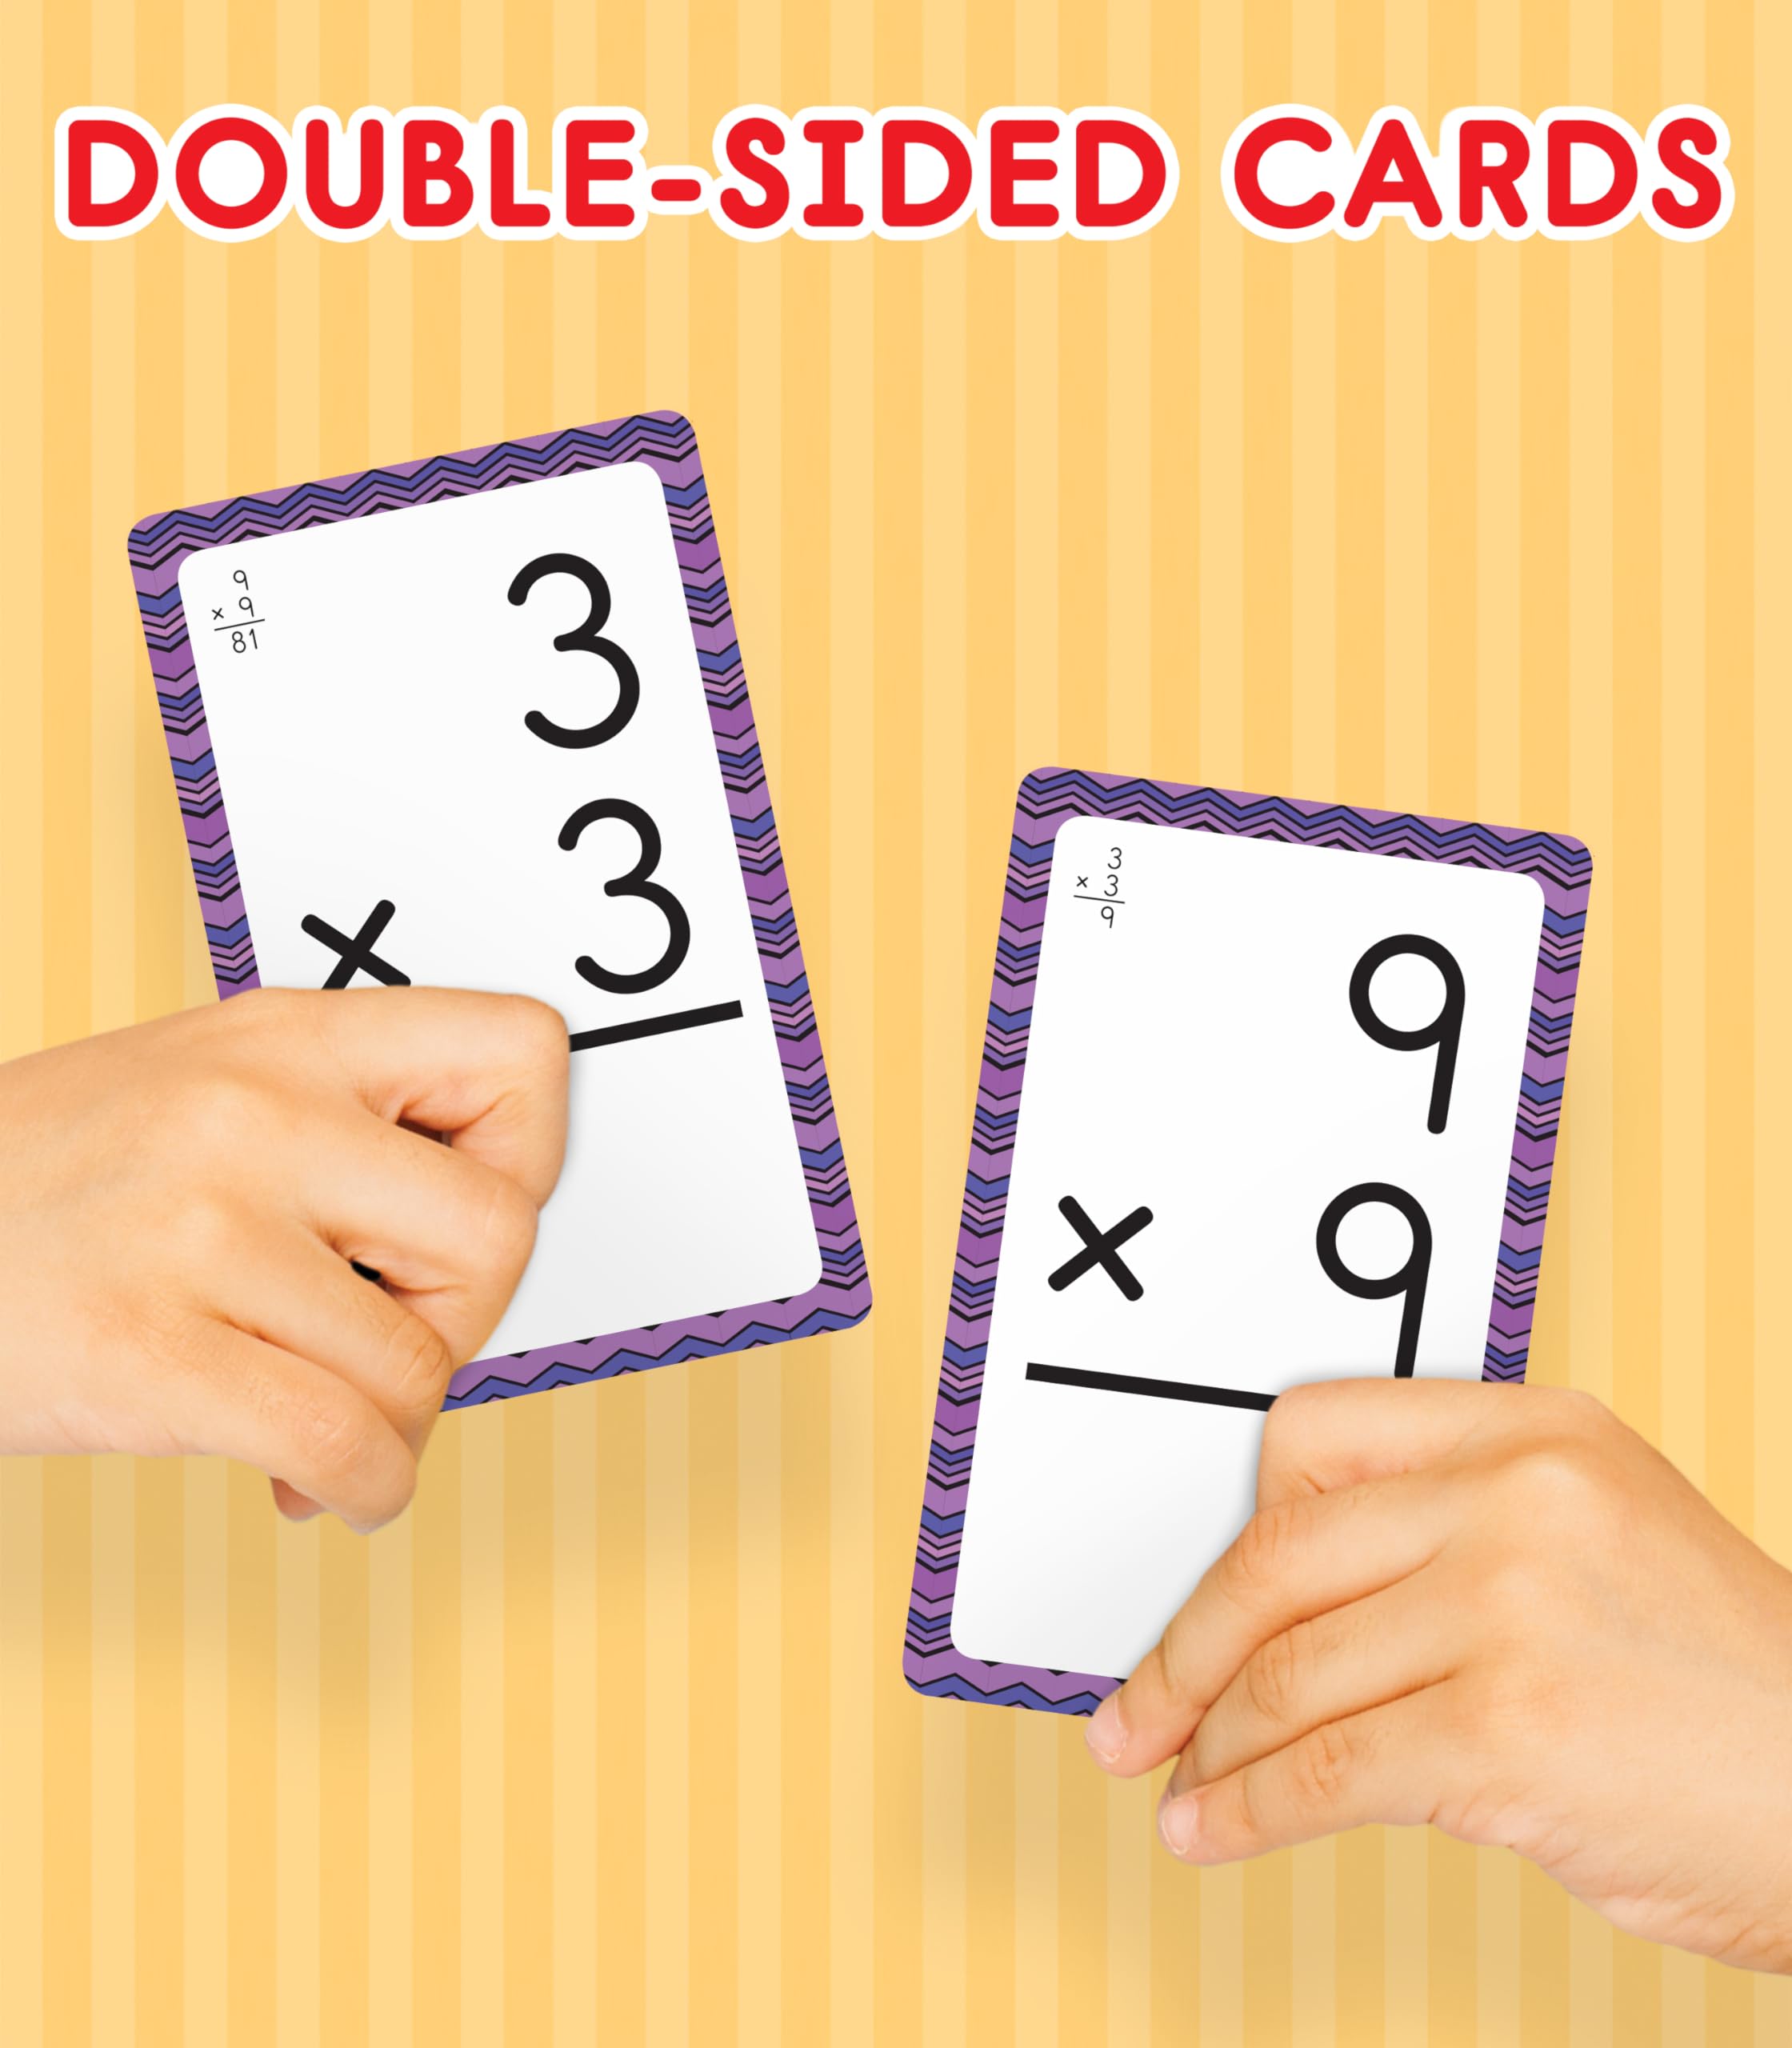 Carson Dellosa 158 Math Flash Cards for Kids Ages 8+, 3-Pack of Whole Number to Ninths Fractions Flash Cards, Facts 0-12 Multiplication and Division Flash Cards for 3rd Grade, 4th Grade, and 5th Grade